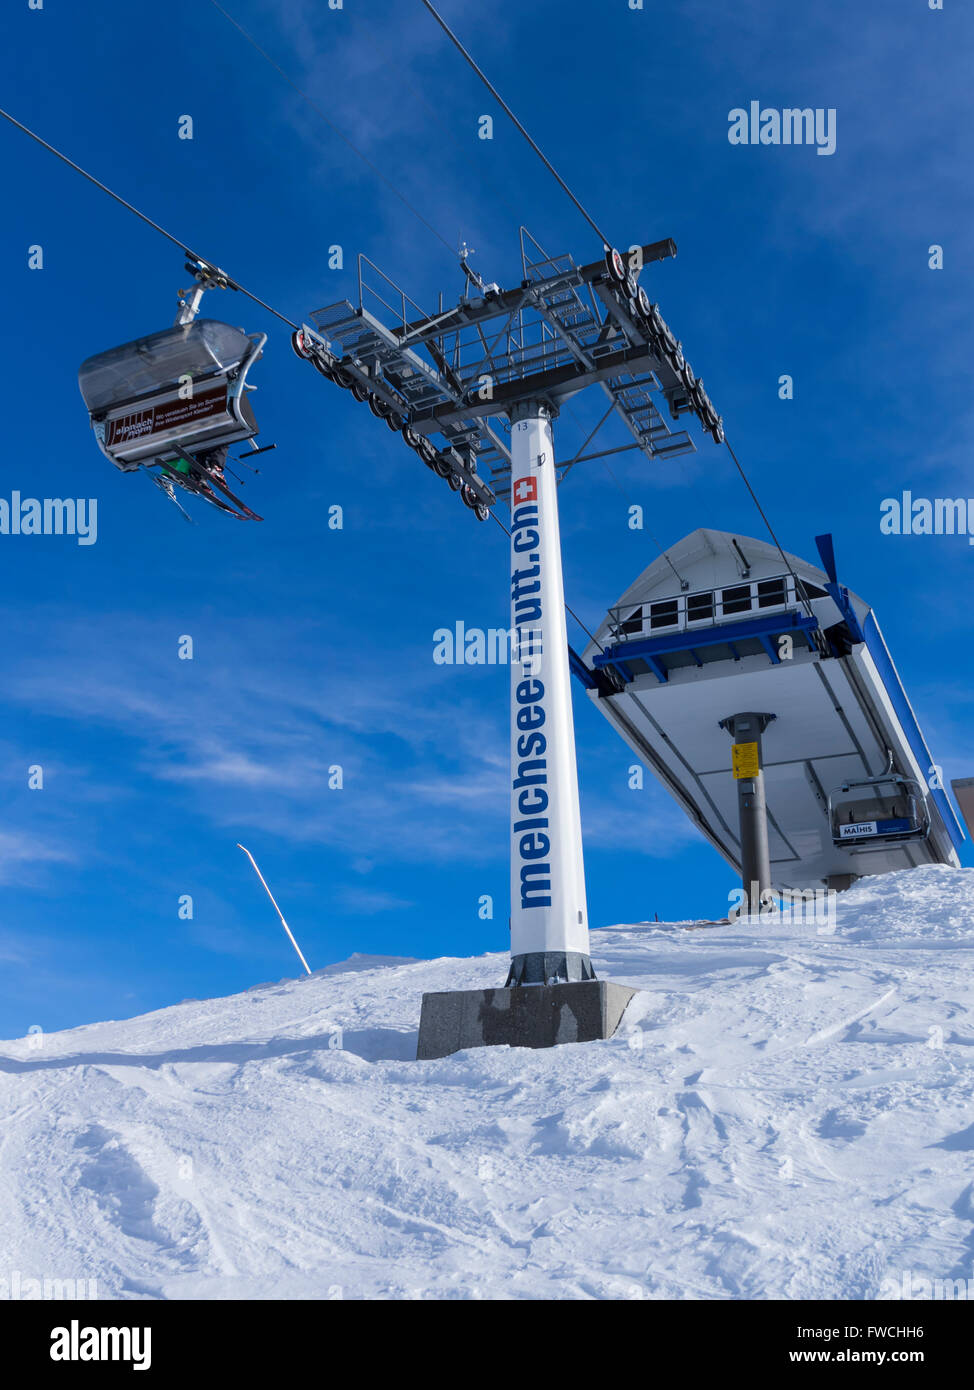 Chairlift in Melchsee-Frutt, Switzerland, with skiers on a chair, and a mast advertising the URL of the winter sports resort. Stock Photo